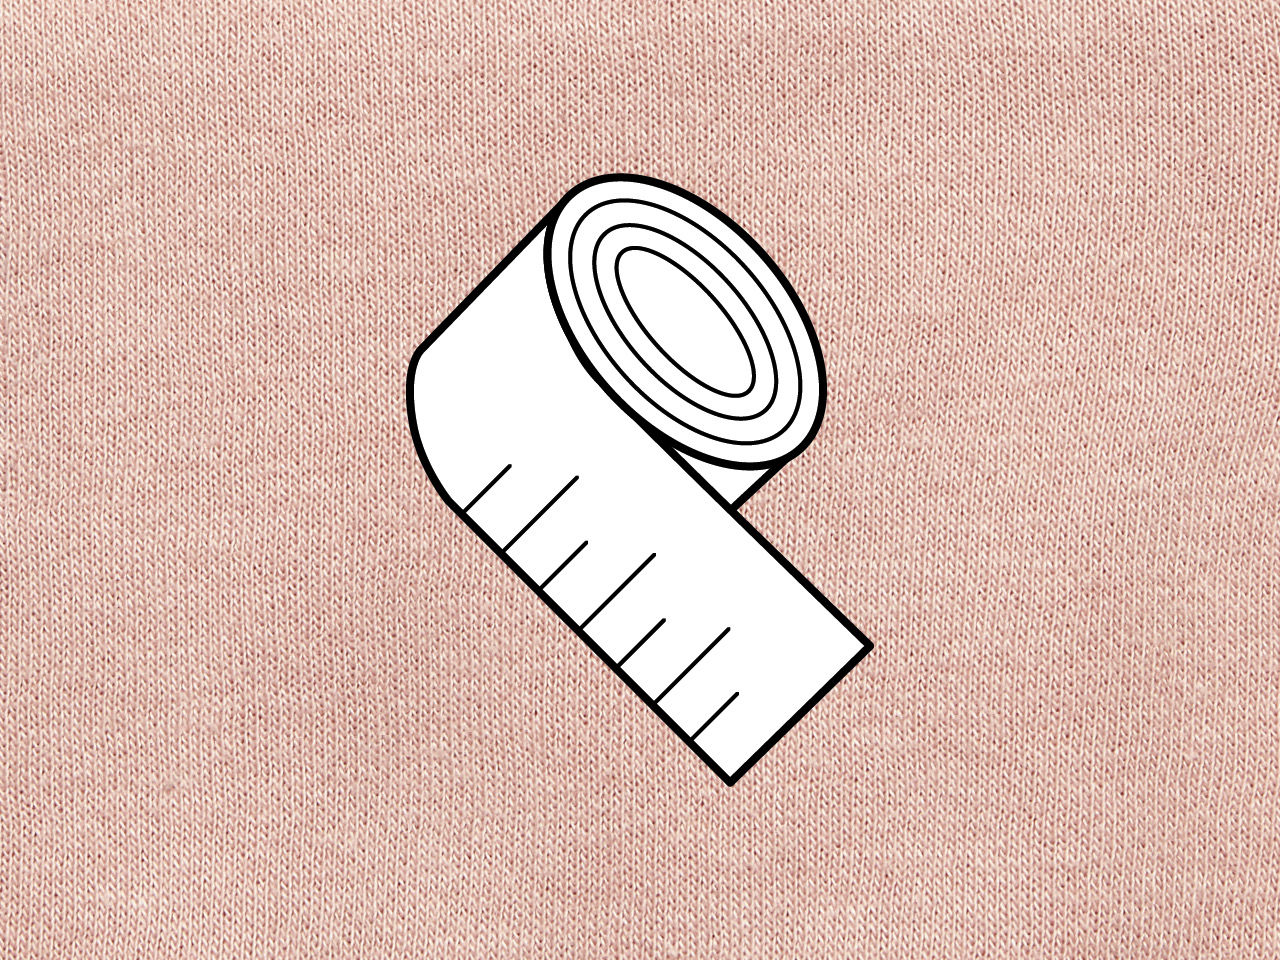 An illustration of a measuring tape on a pink cloth background